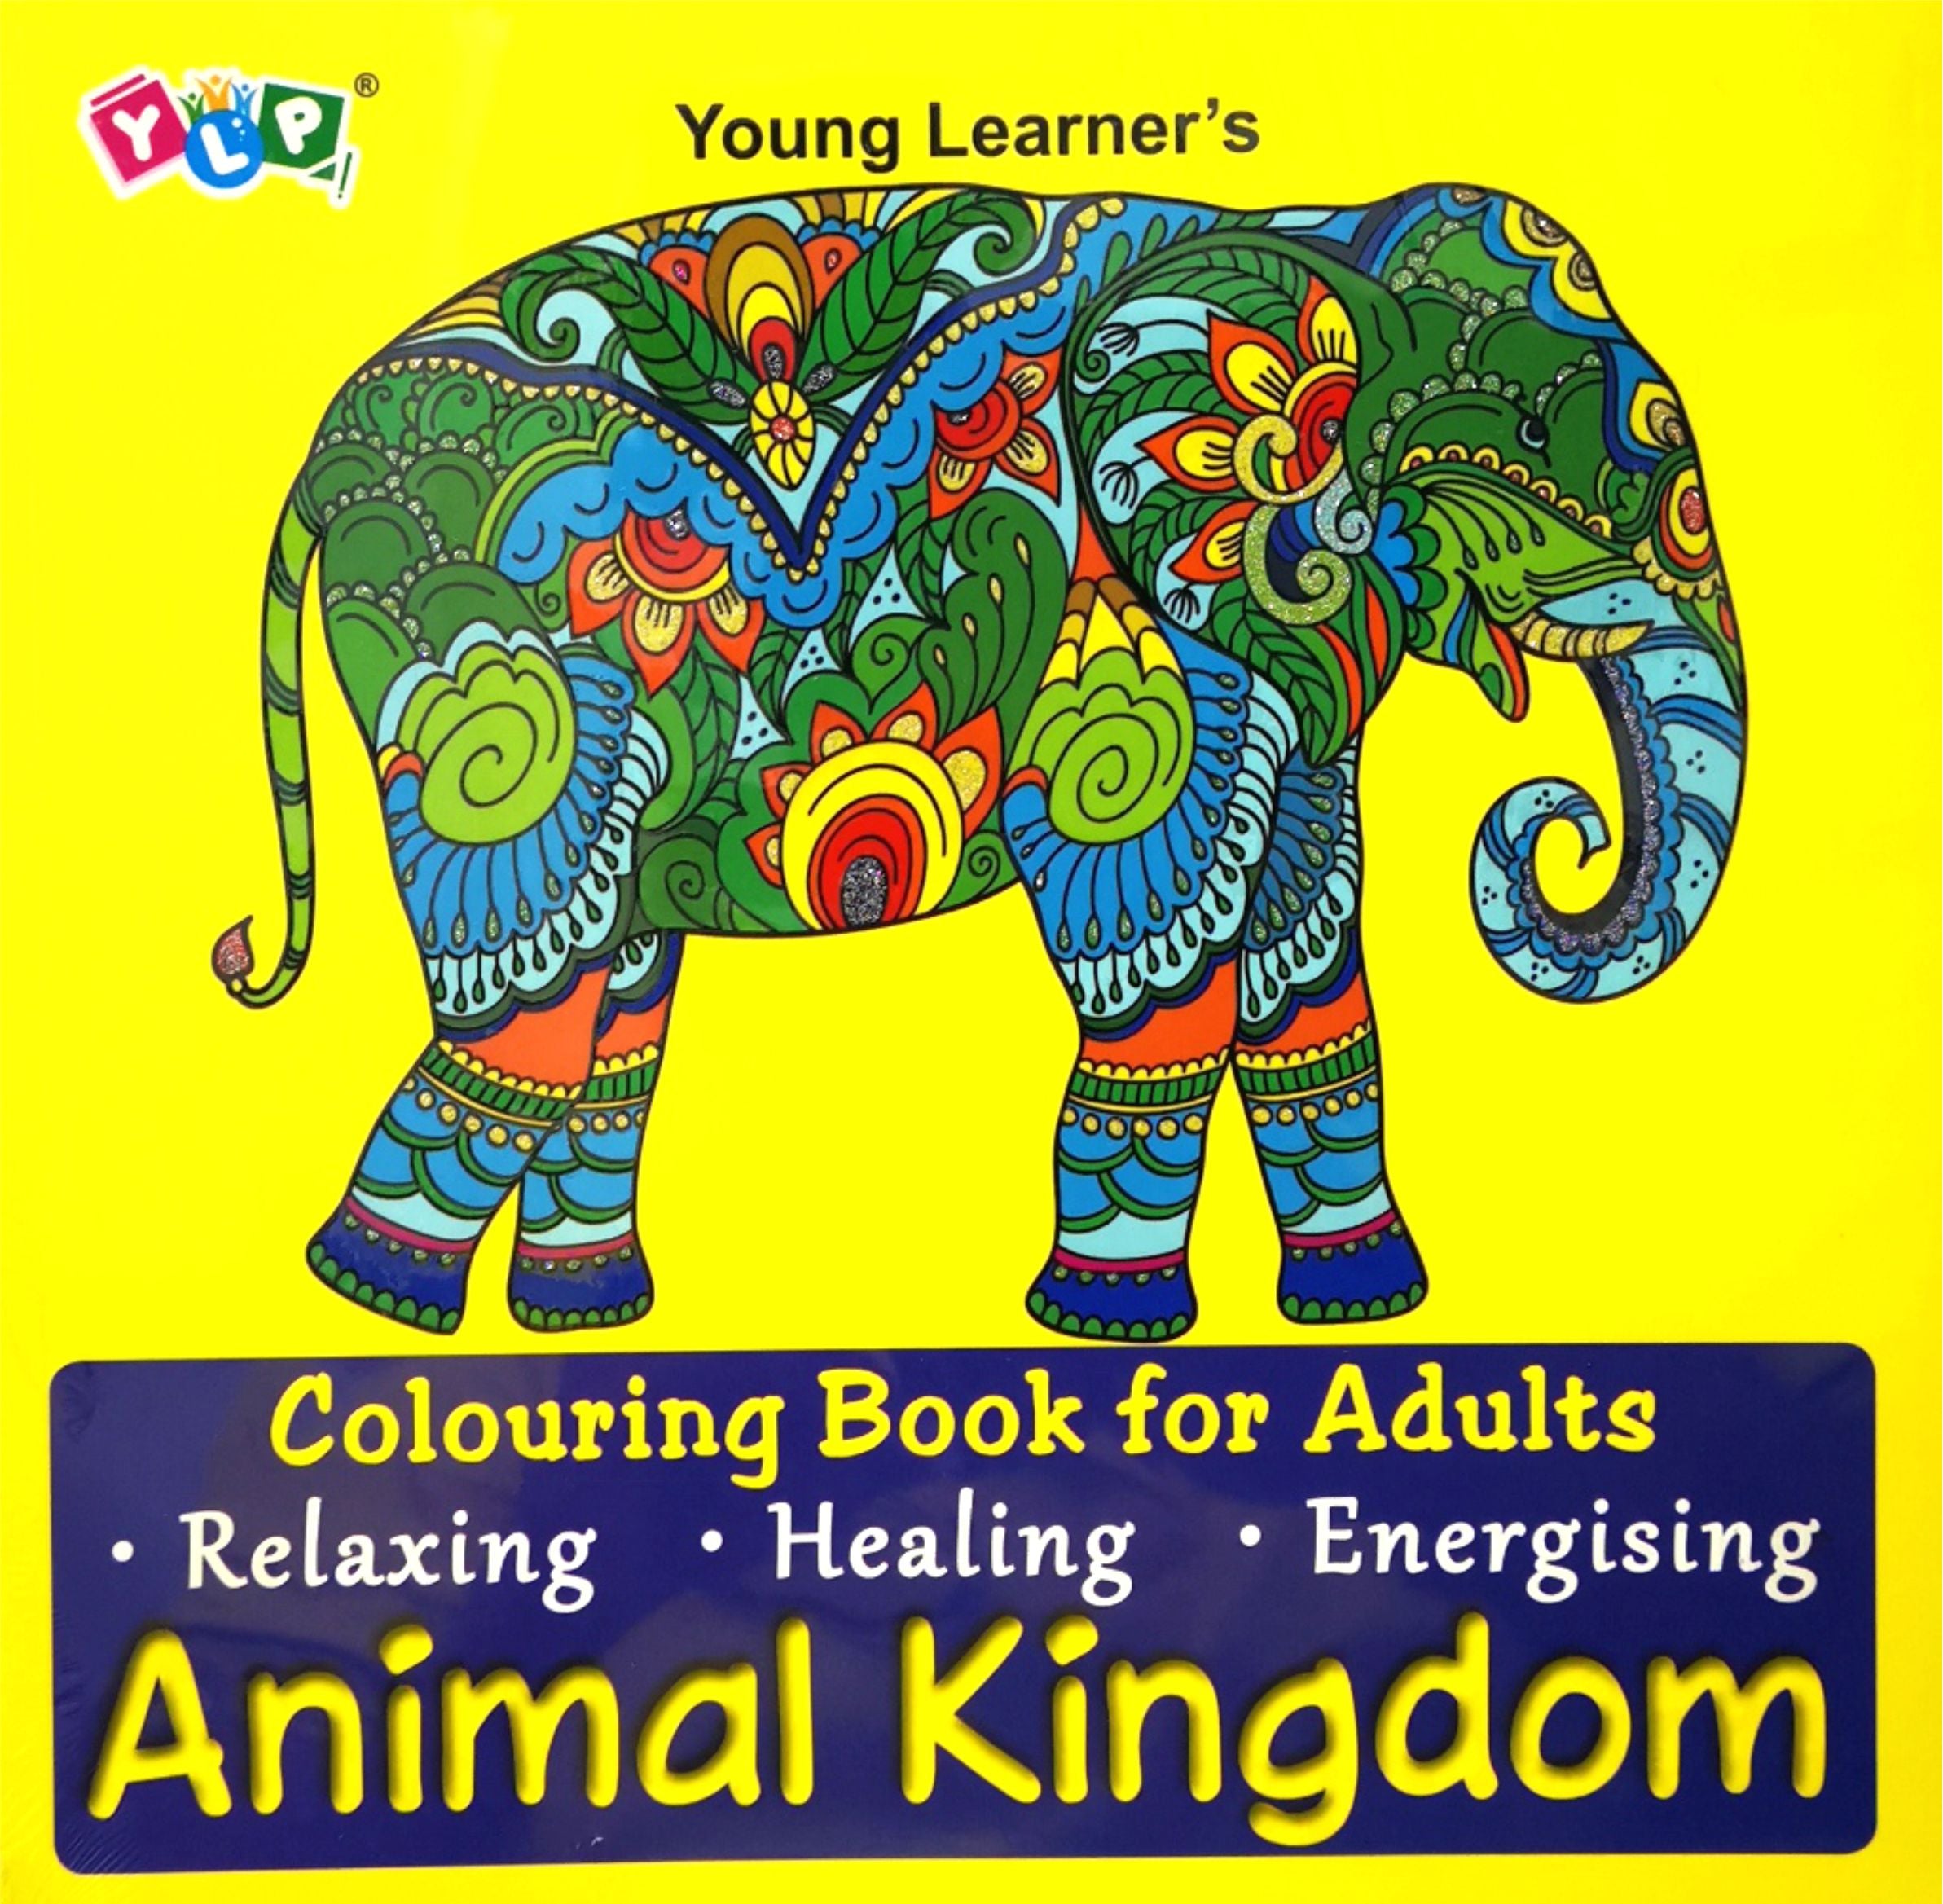 Colouring Book for Adults • Relaxing • Healing • Energising – Animal Kingdom